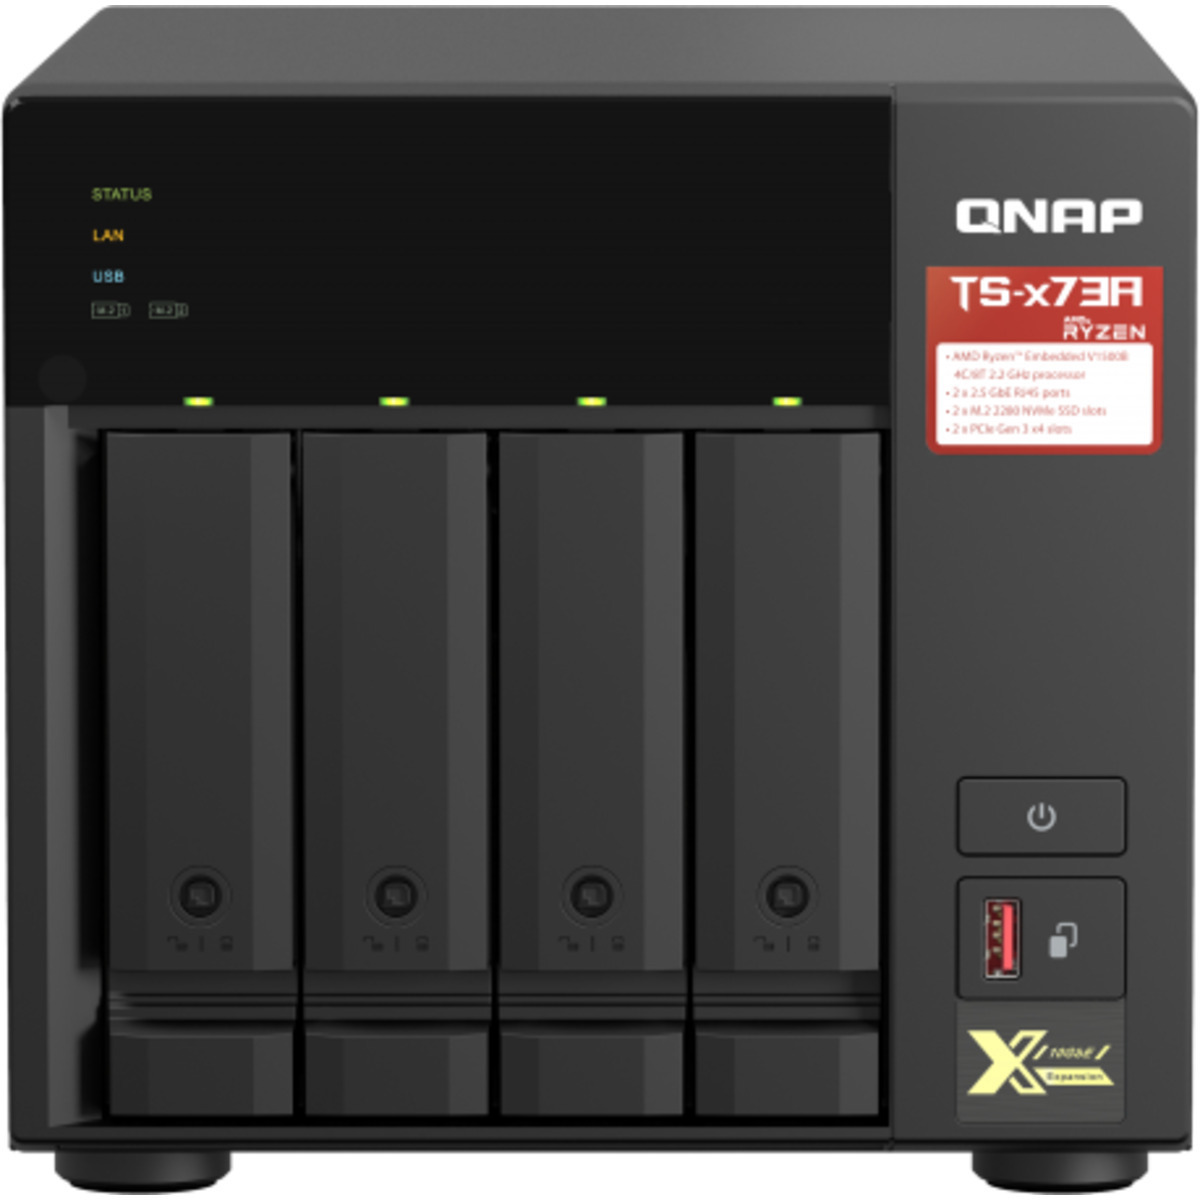 QNAP TS-473A 16tb 4-Bay Desktop Multimedia / Power User / Business NAS - Network Attached Storage Device 4x4tb Seagate IronWolf ST4000VN006 3.5 5400rpm SATA 6Gb/s HDD NAS Class Drives Installed - Burn-In Tested TS-473A